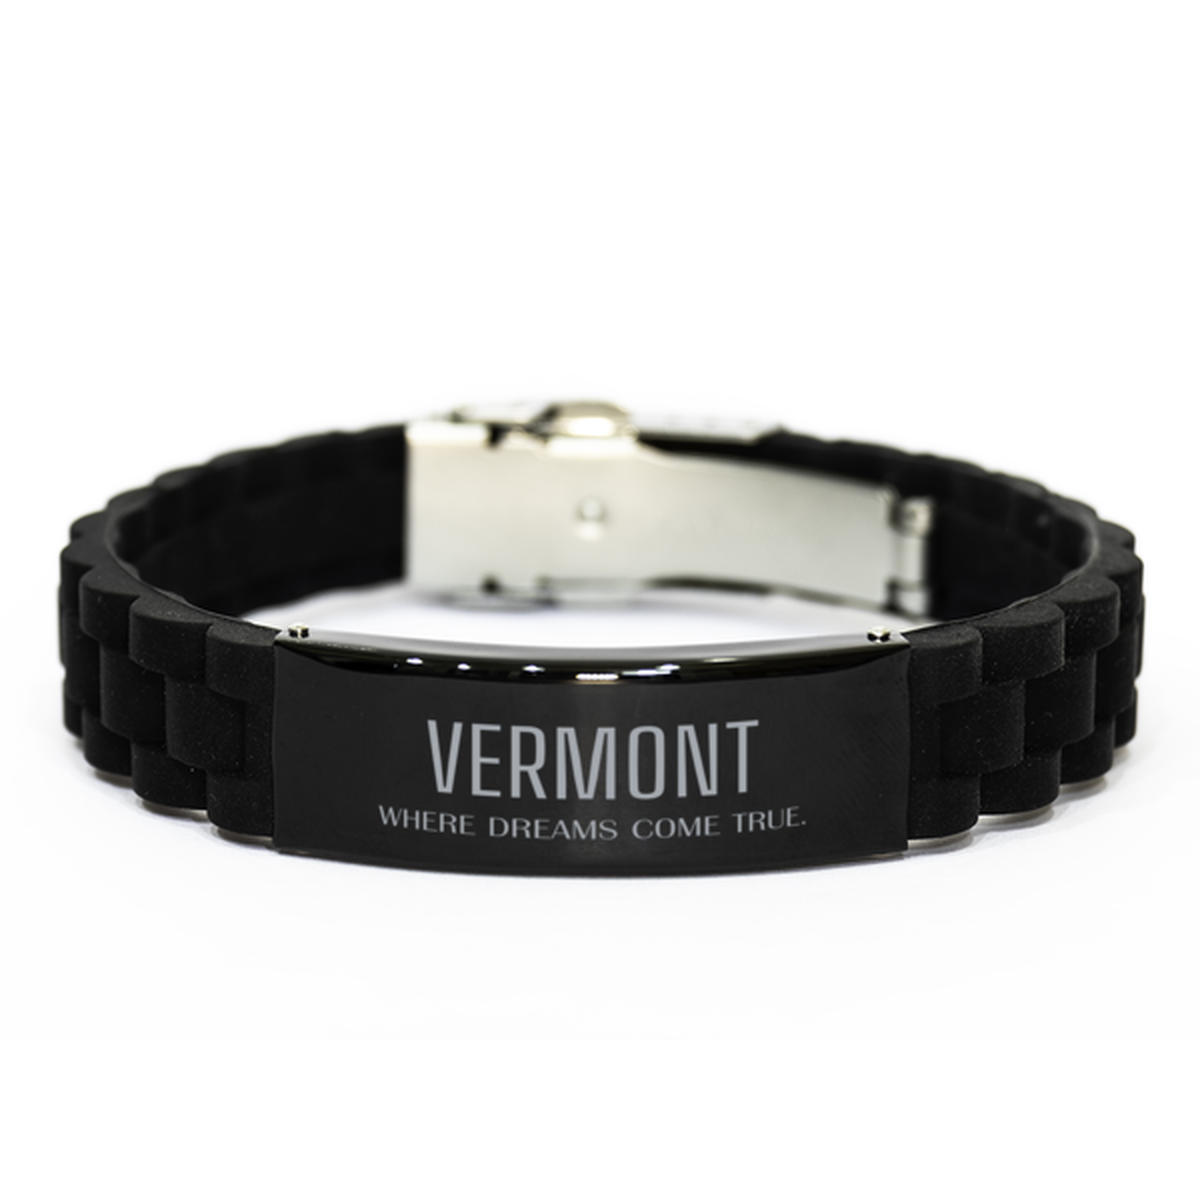 Love Vermont State Black Glidelock Clasp Bracelet, Vermont Where dreams come true, Birthday Inspirational Gifts For Vermont Men, Women, Friends